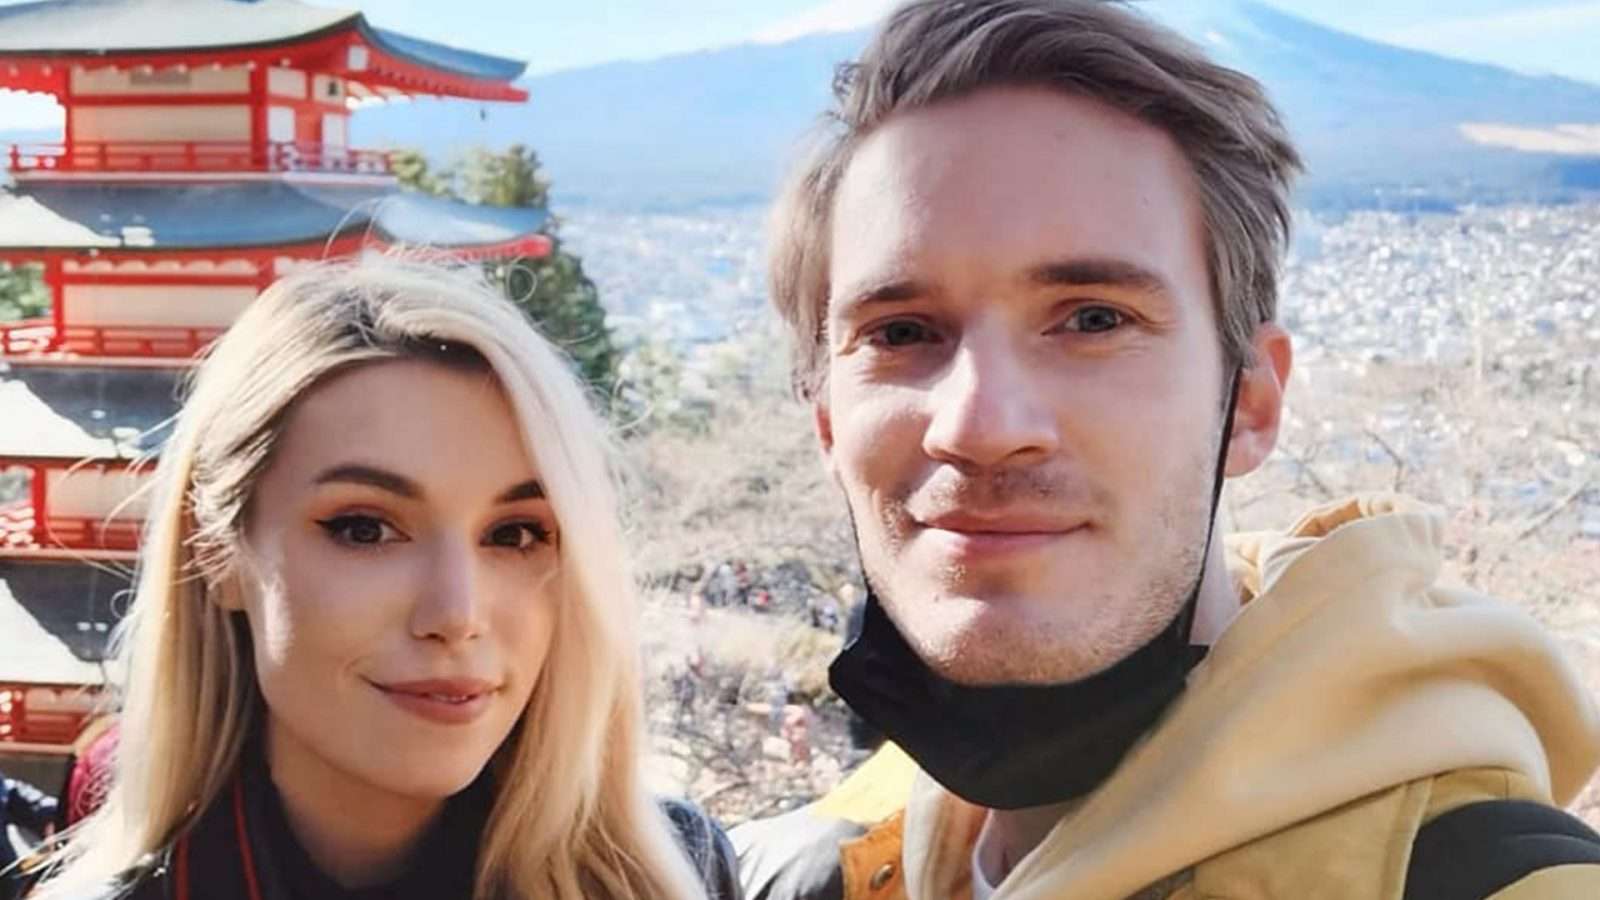 PewDiePie finally moves to Japan